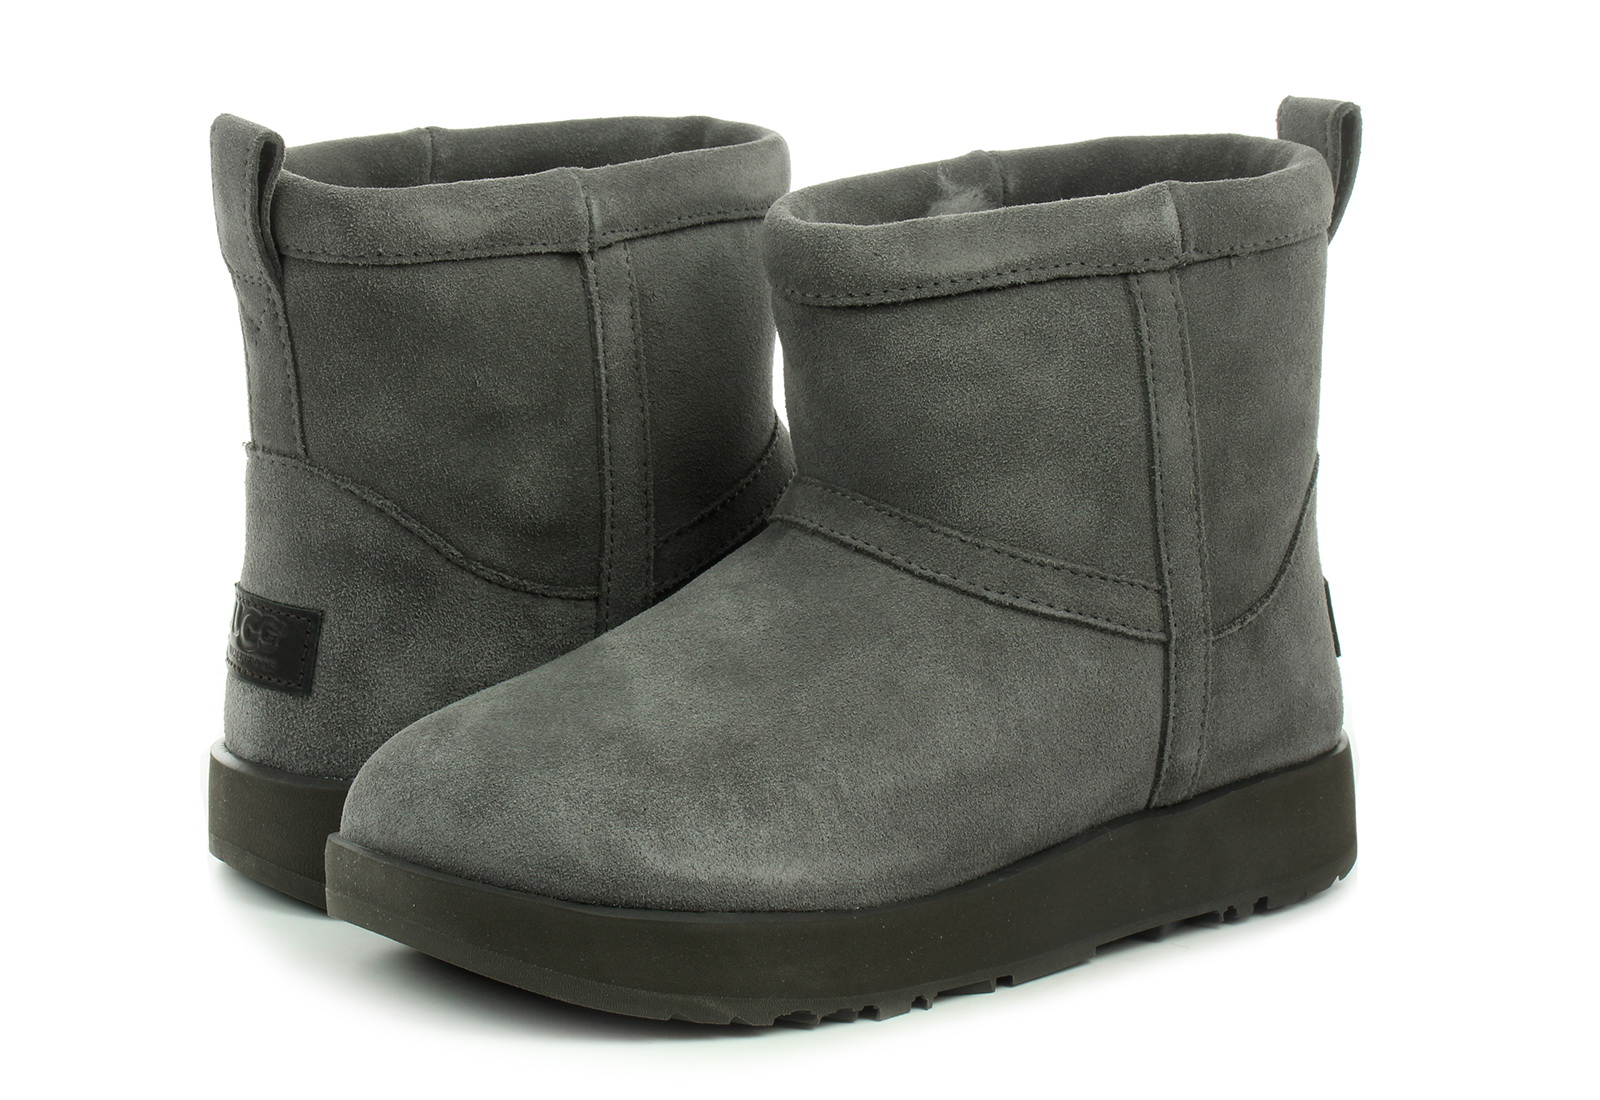 trimmen markering Soepel UGG Ankle boots - Classic Mini Waterproof - 1019643-mtl - Online shop for  sneakers, shoes and boots